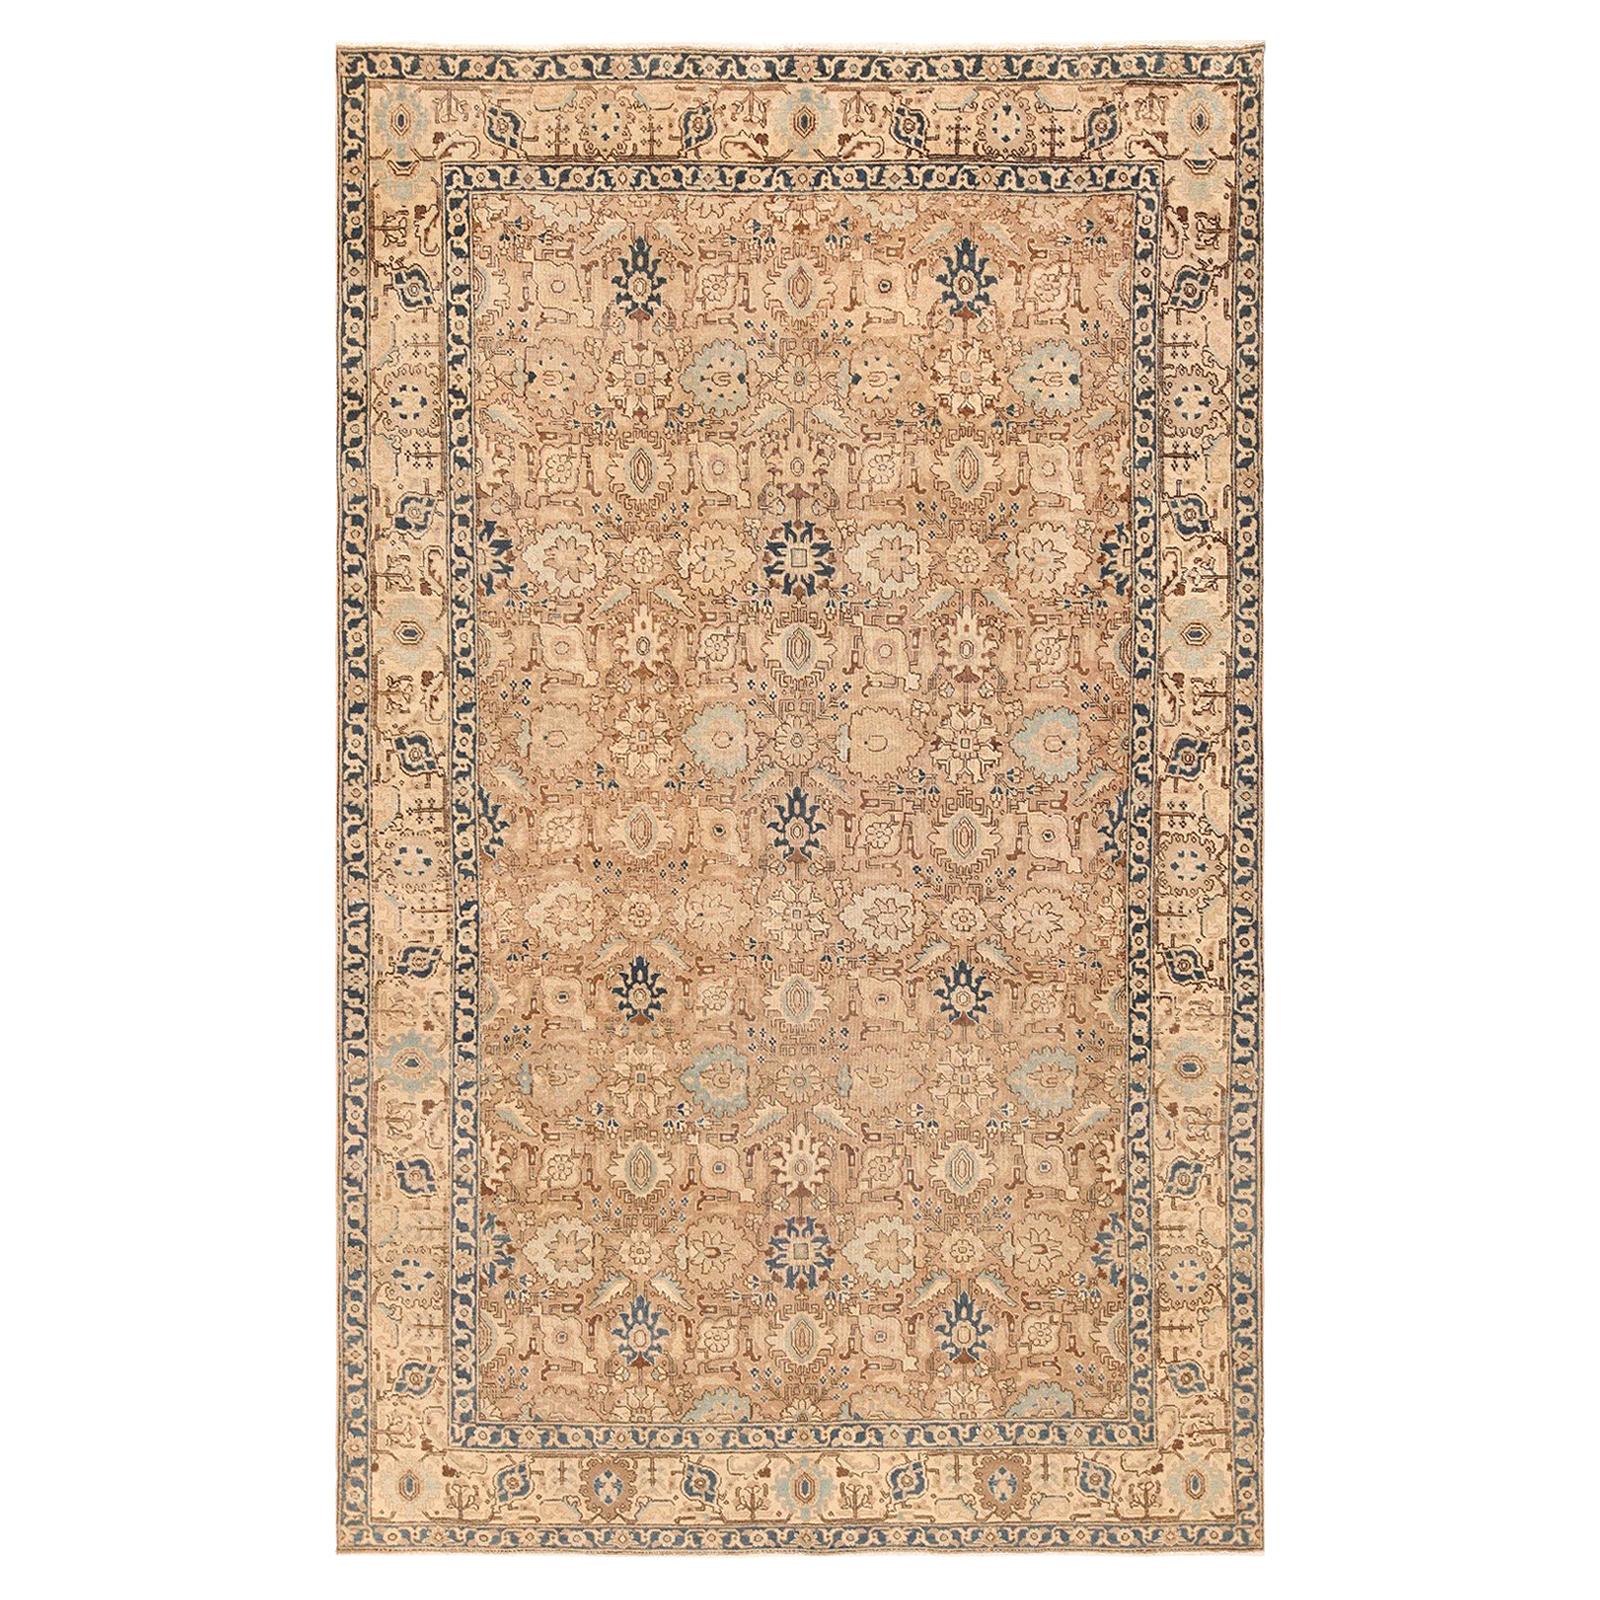 Decorative Neutral Antique Room Size Persian Tabriz Rug. Size: 6 ft 4 in x 10 ft